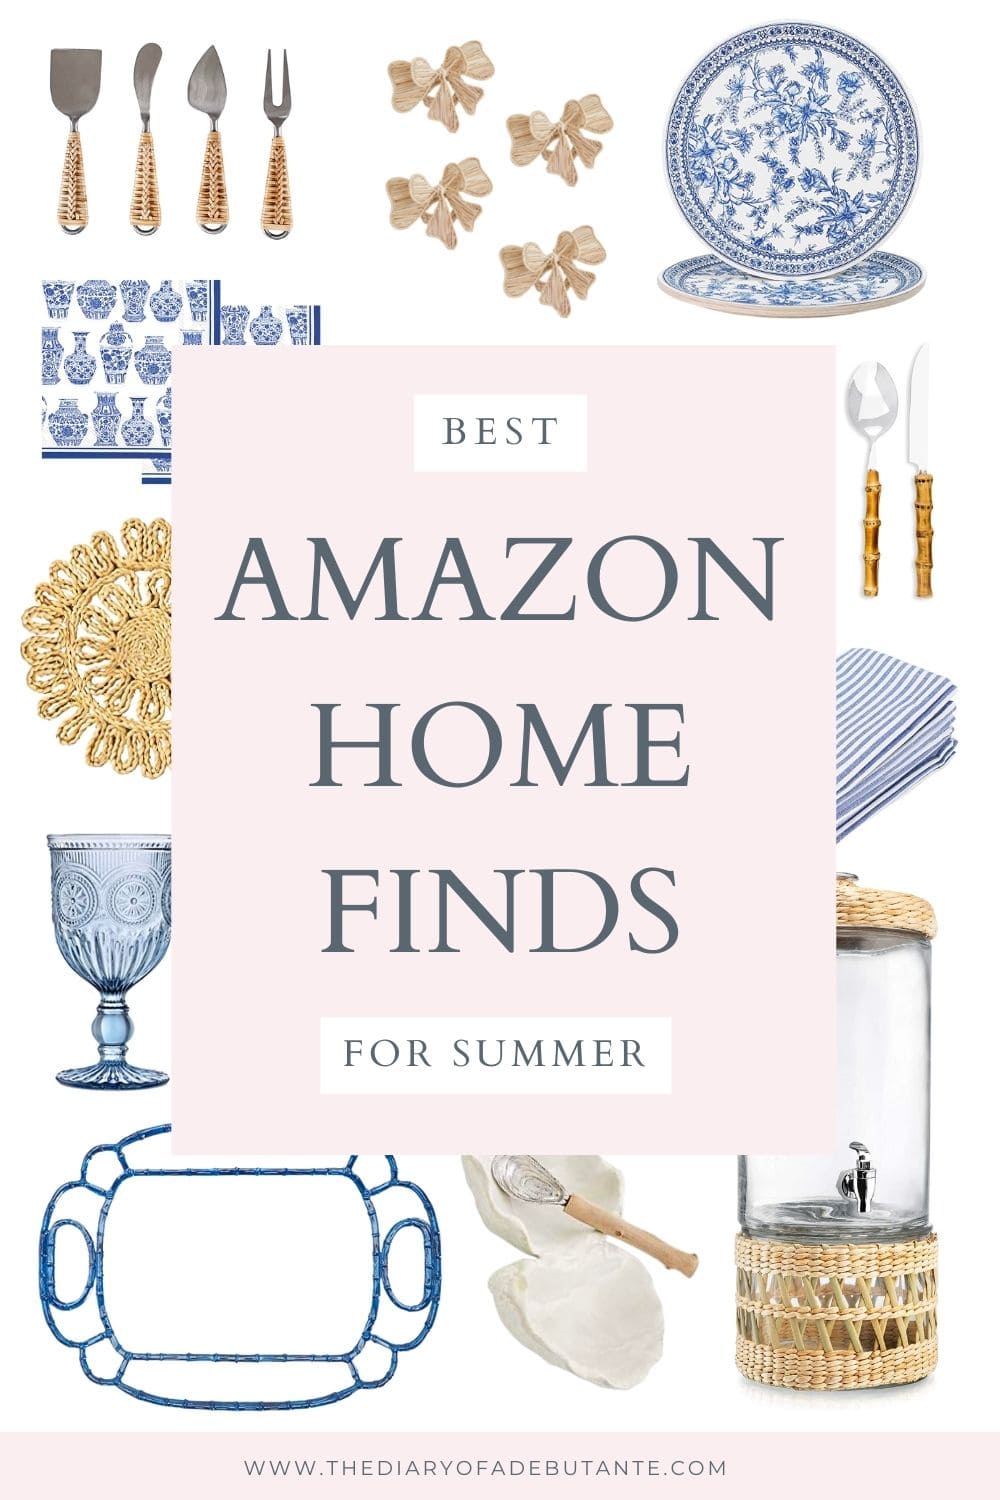 Best Amazon home finds for summer curated by southern lifestyle blogger Stephanie Ziajka on Diary of a Debutante